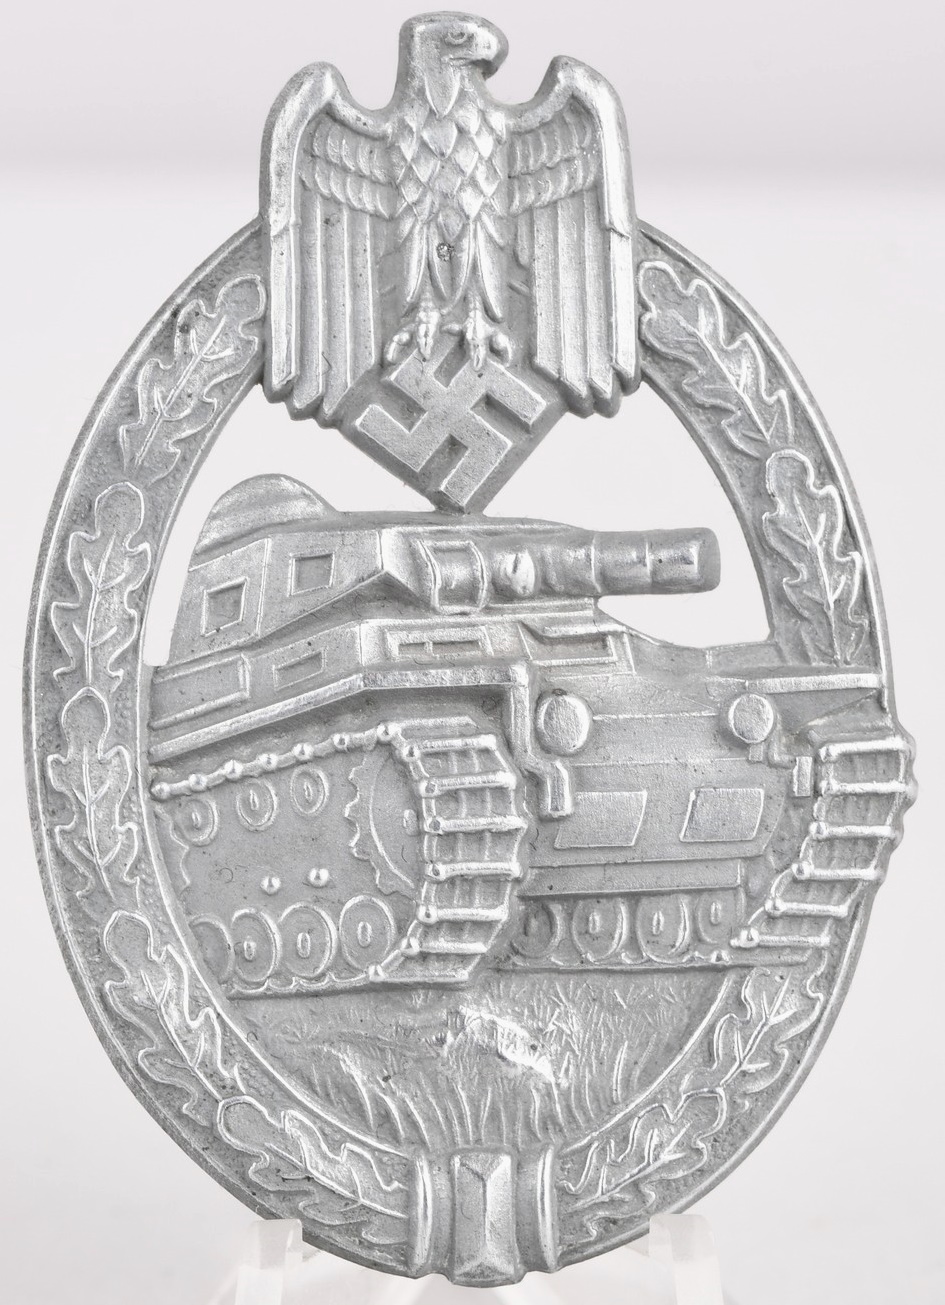 Panzer Assault Badge in Silver Maker Marked AS